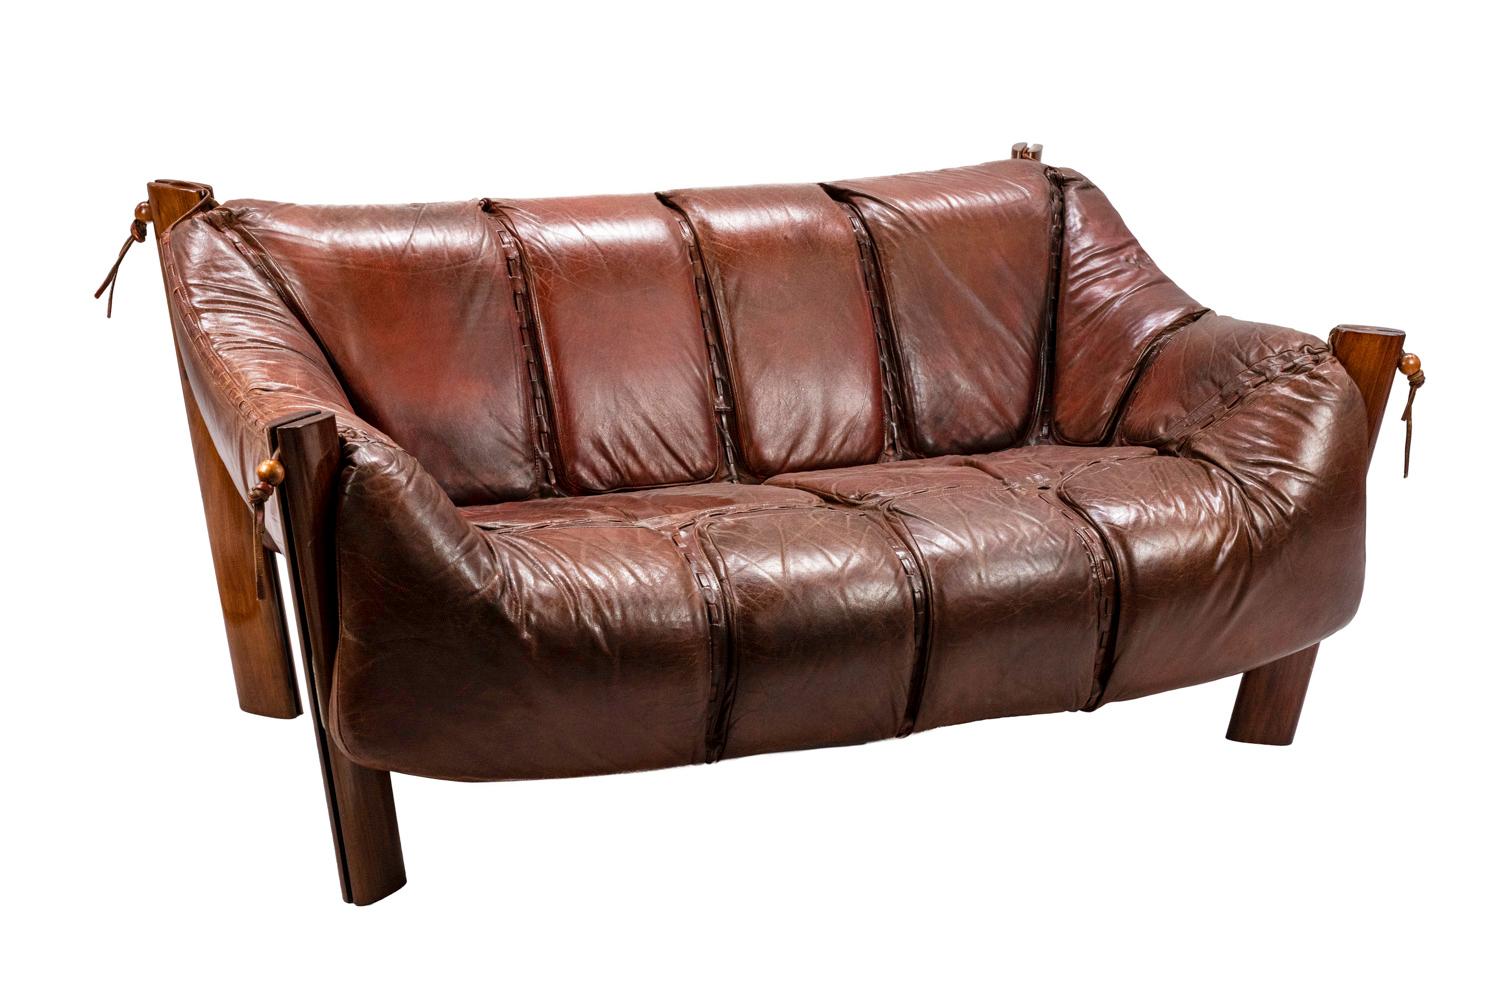 Percival Lafer, attributed to.
Two-seat sofa MP-211 in slightly orange brown leather standing on four rectangular legs with curved angles in Rio rosewood. One-piece seat and back composed by leather parts linked with each others by lattices, hung